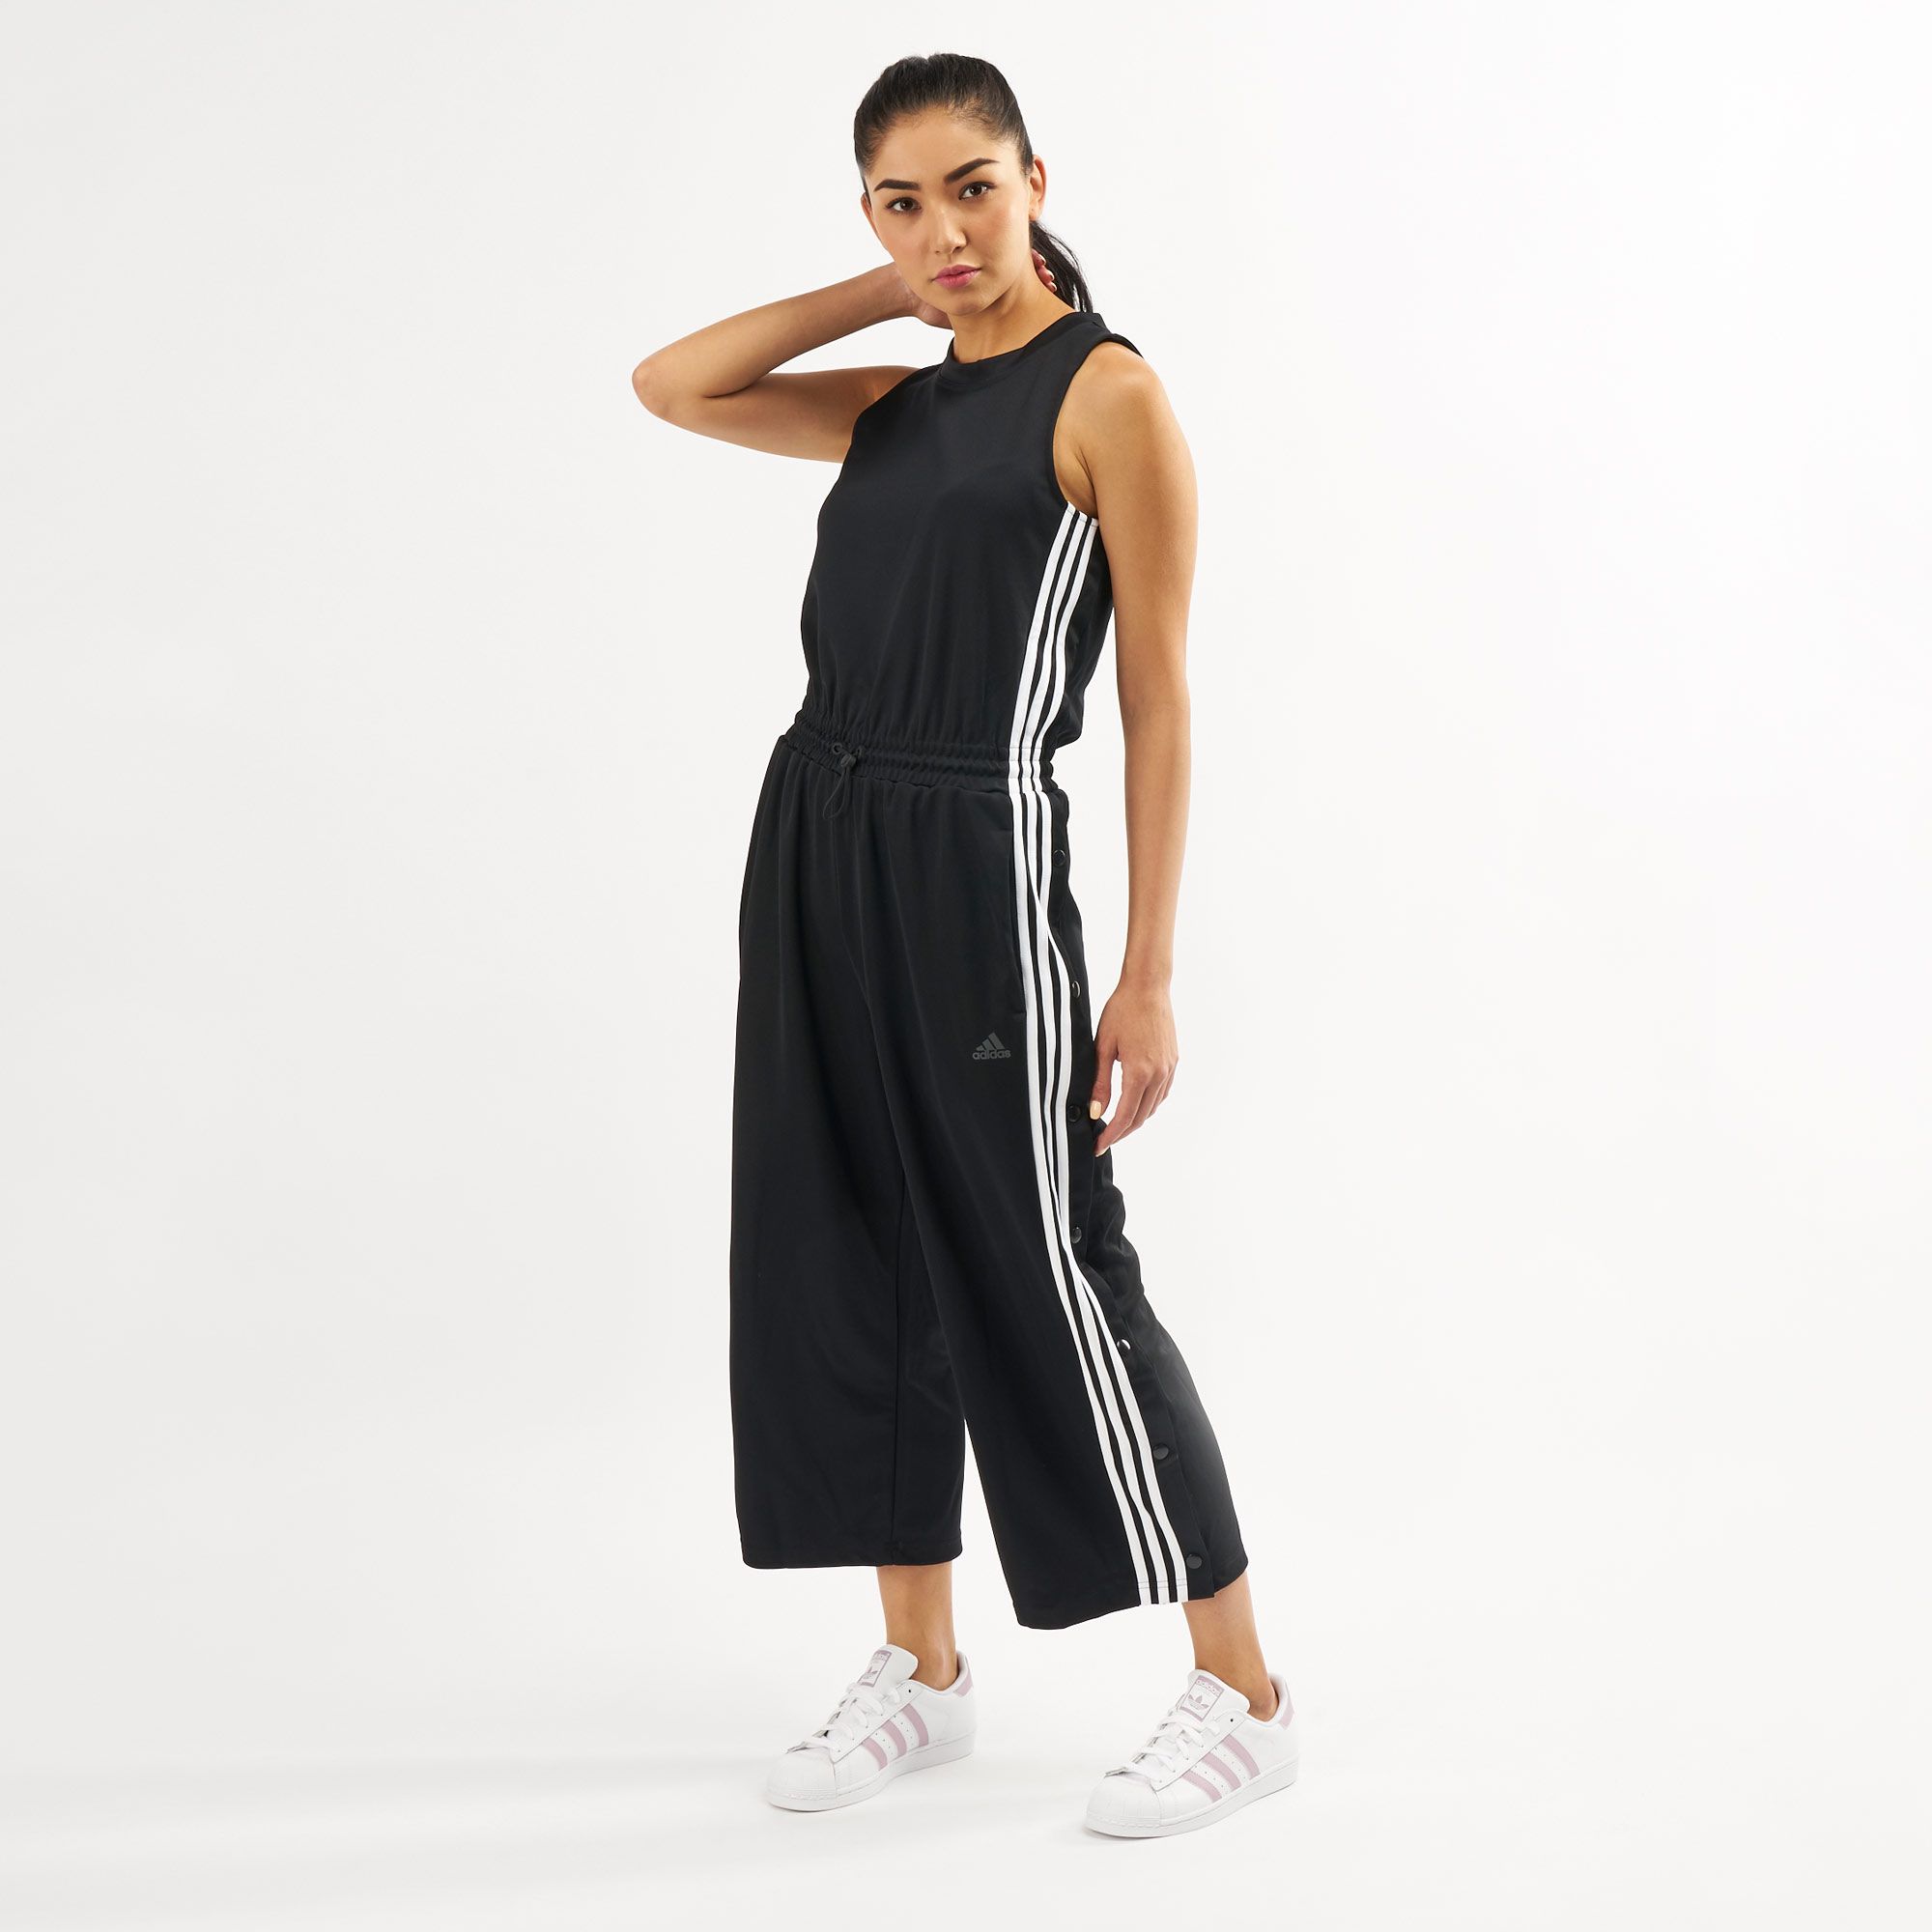 Isla Paul: How To Turn Your Adidas Originals Knitted Romper From Blah